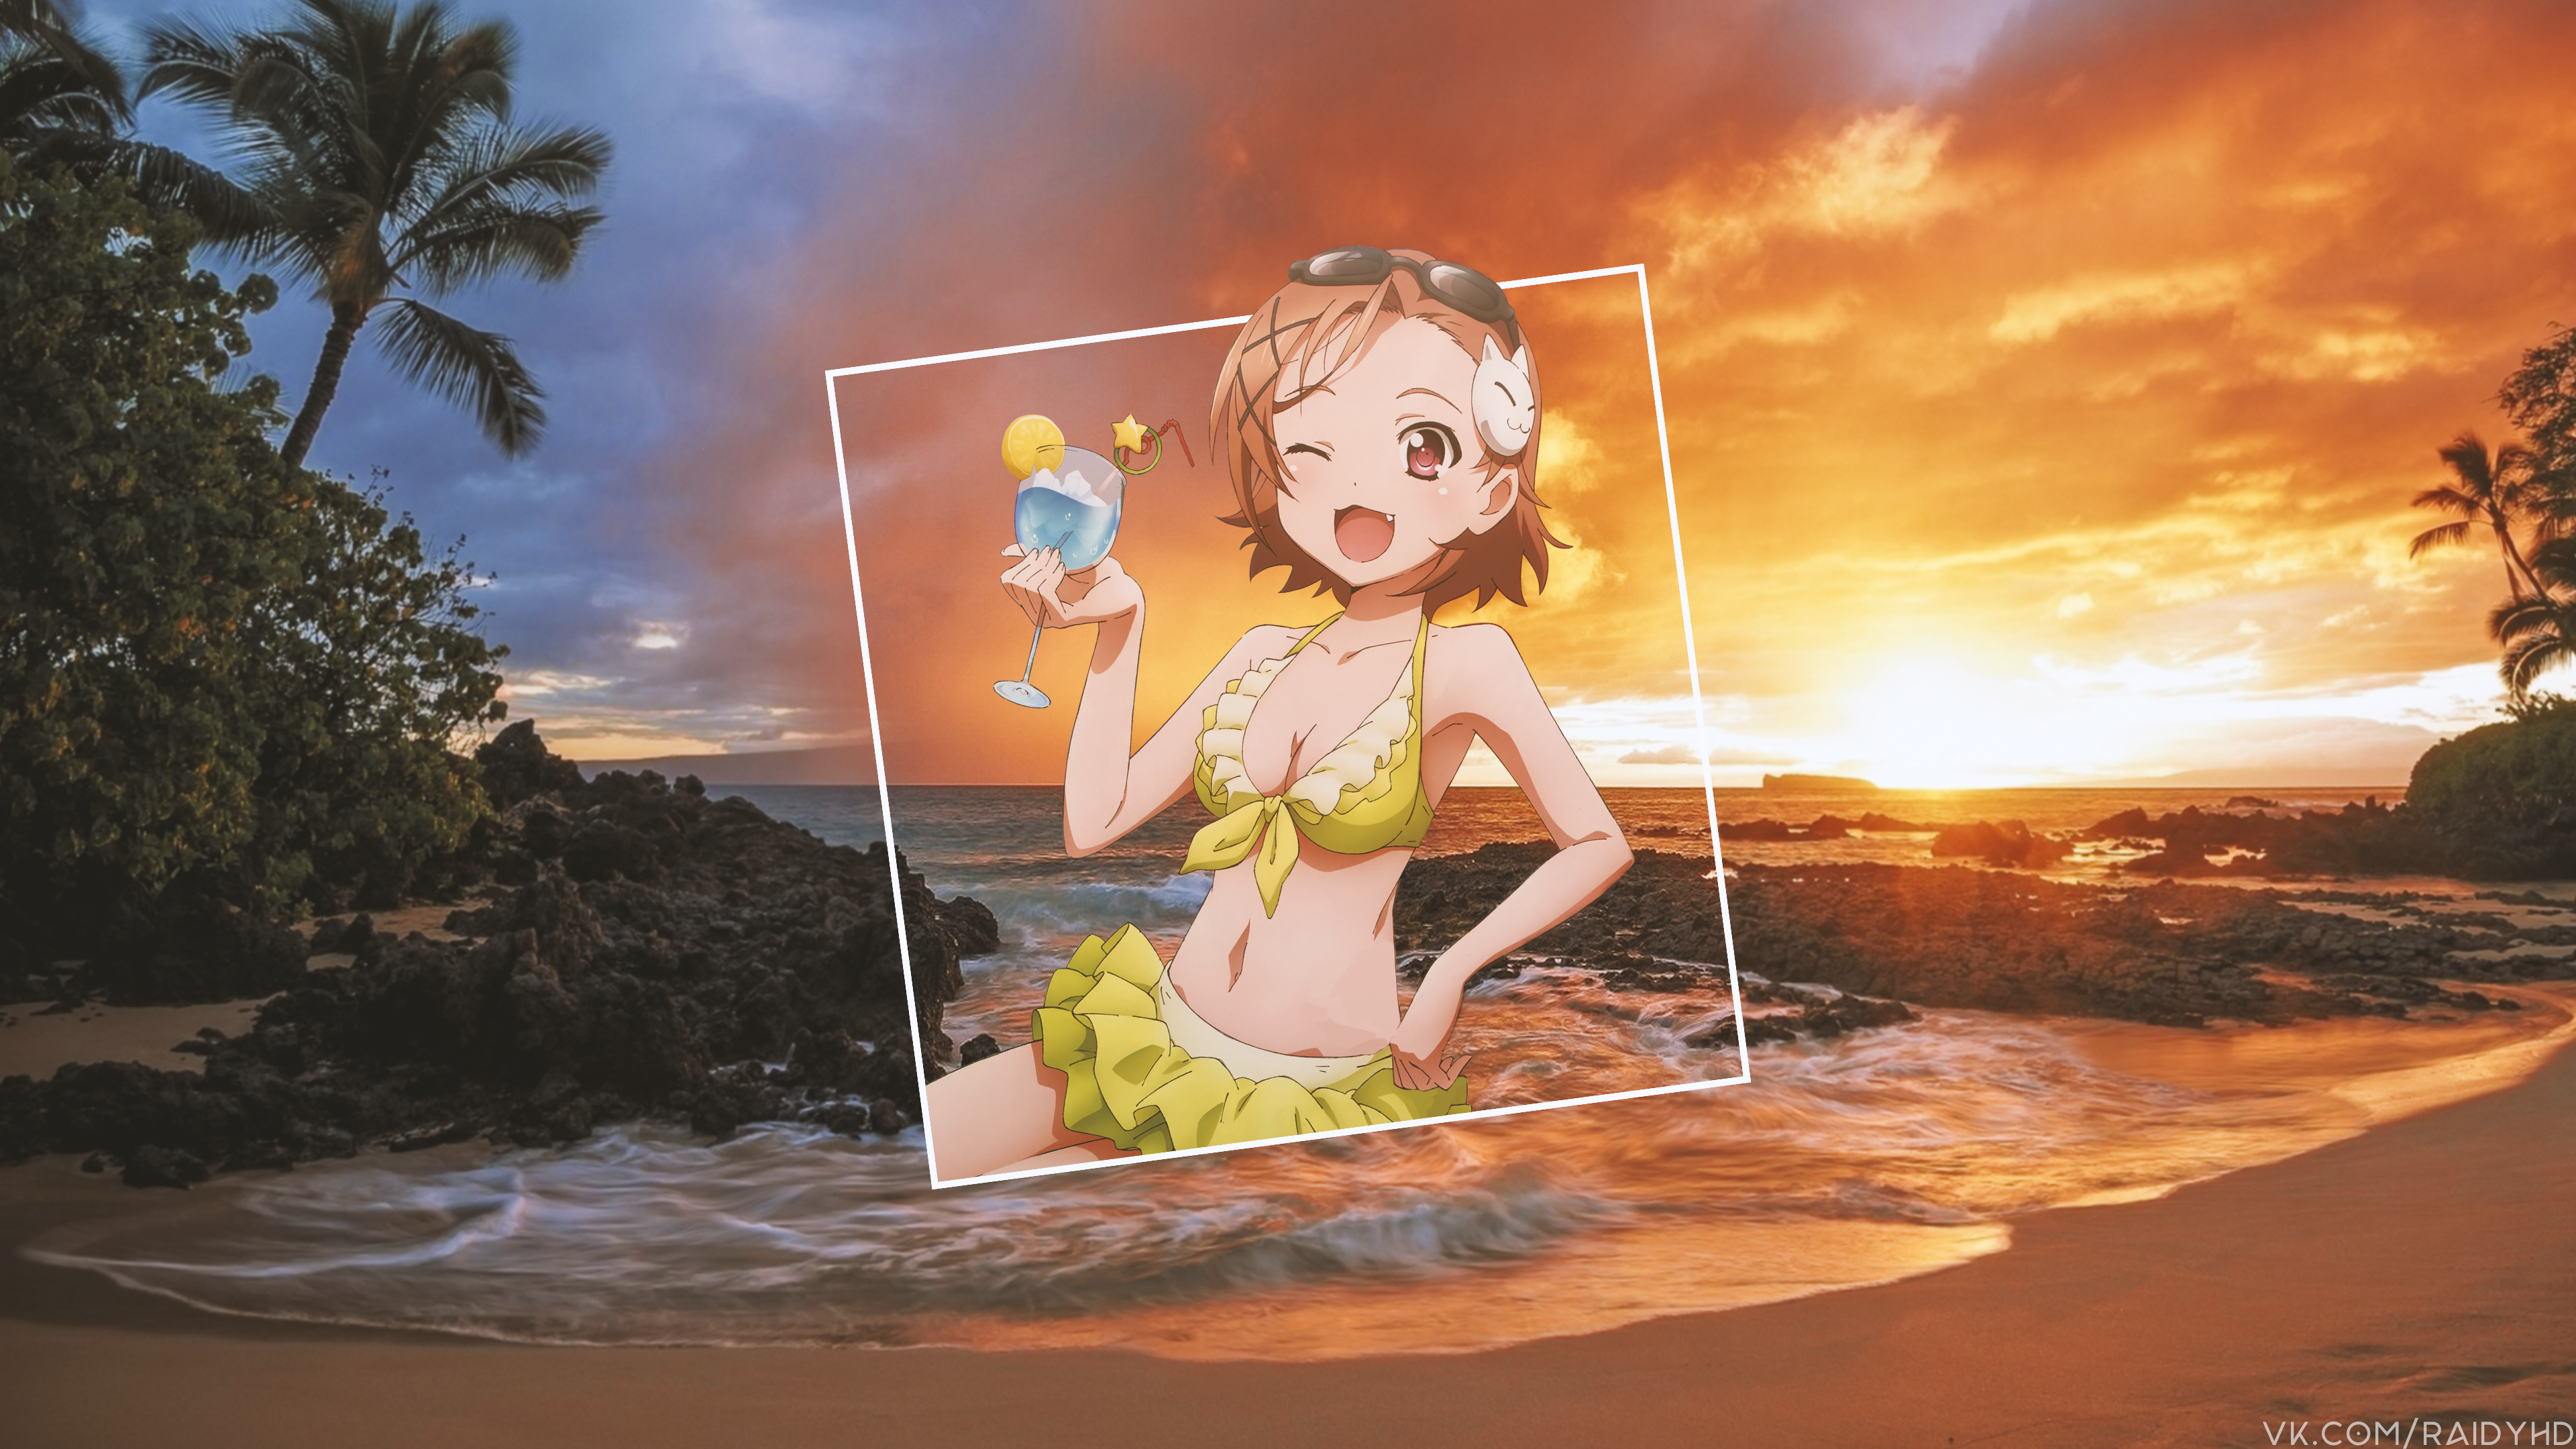 Anime 3840x2160 anime anime girls picture-in-picture bikini beach open mouth palm trees cocktails sunset Accel World